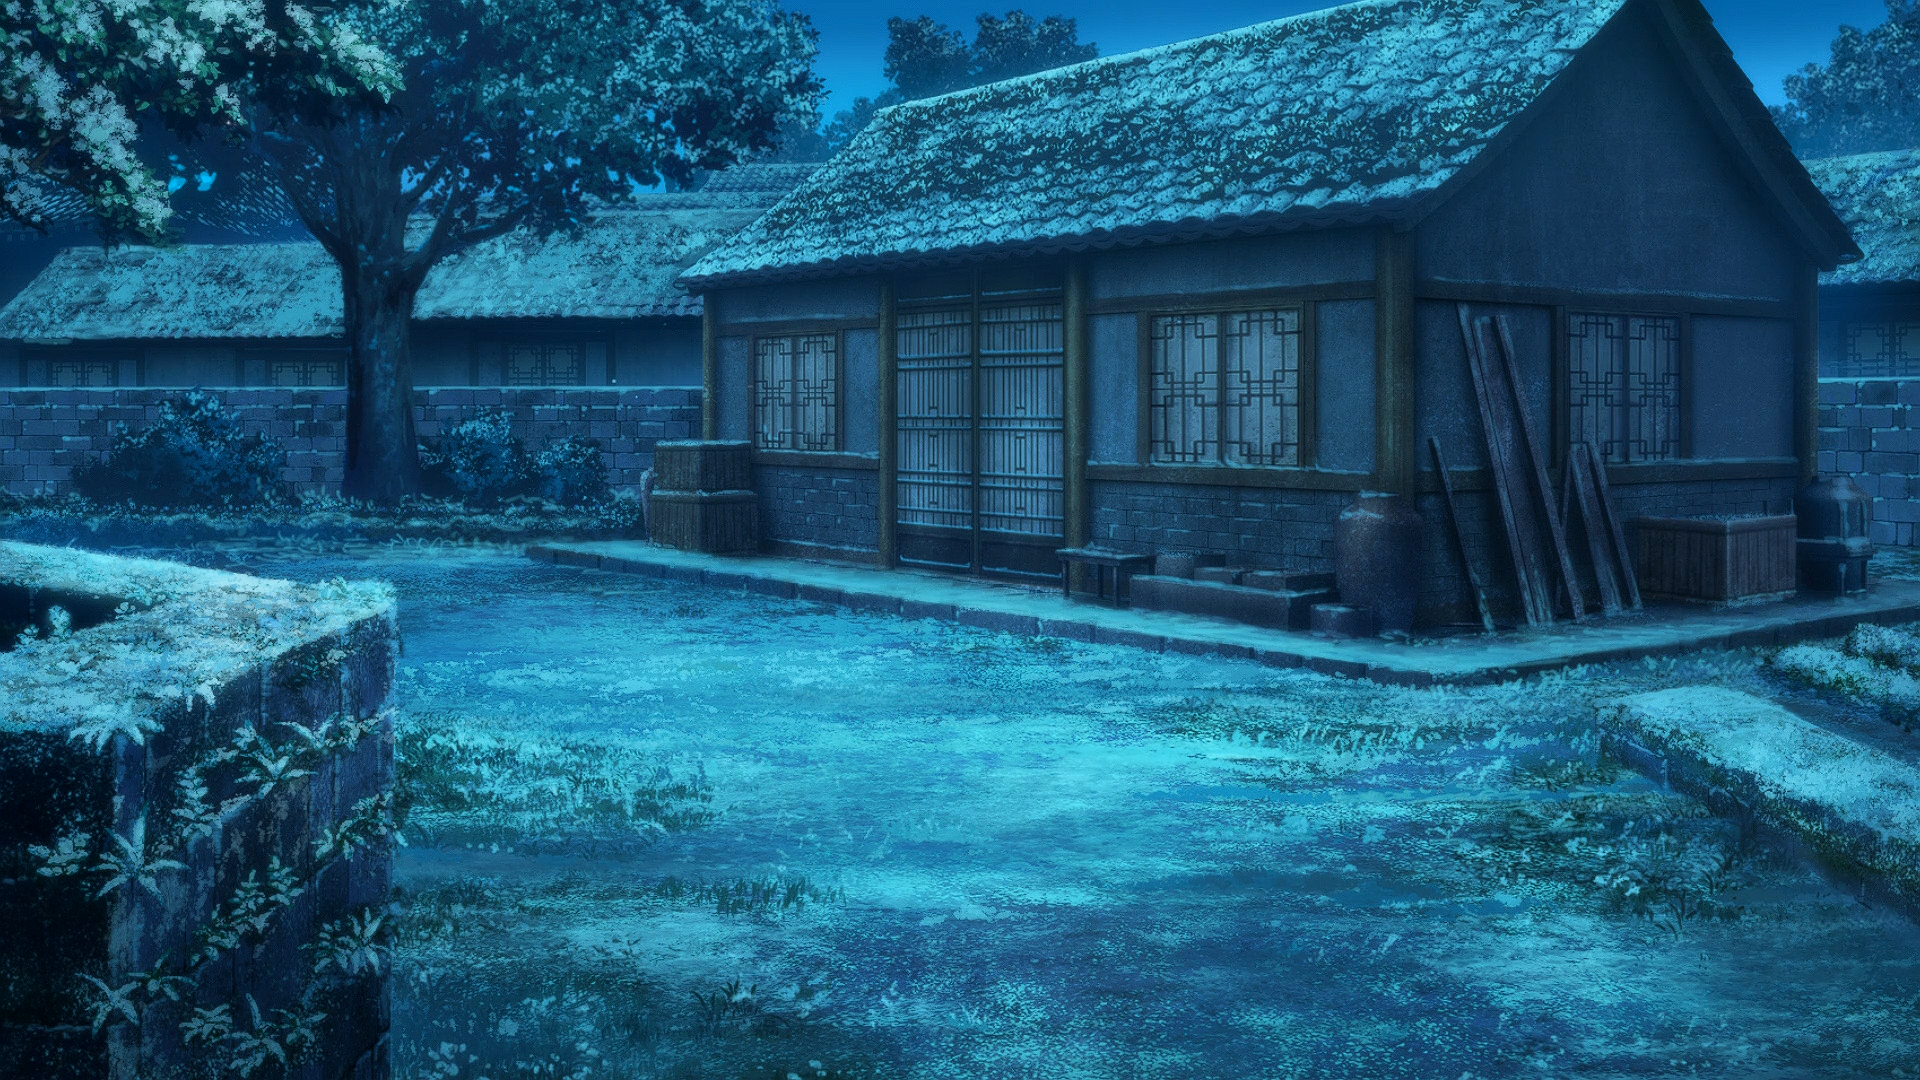 The Apothecary Diaries Winter Snow Asian Architecture Japanese Night Anime Screen Shot 1920x1080